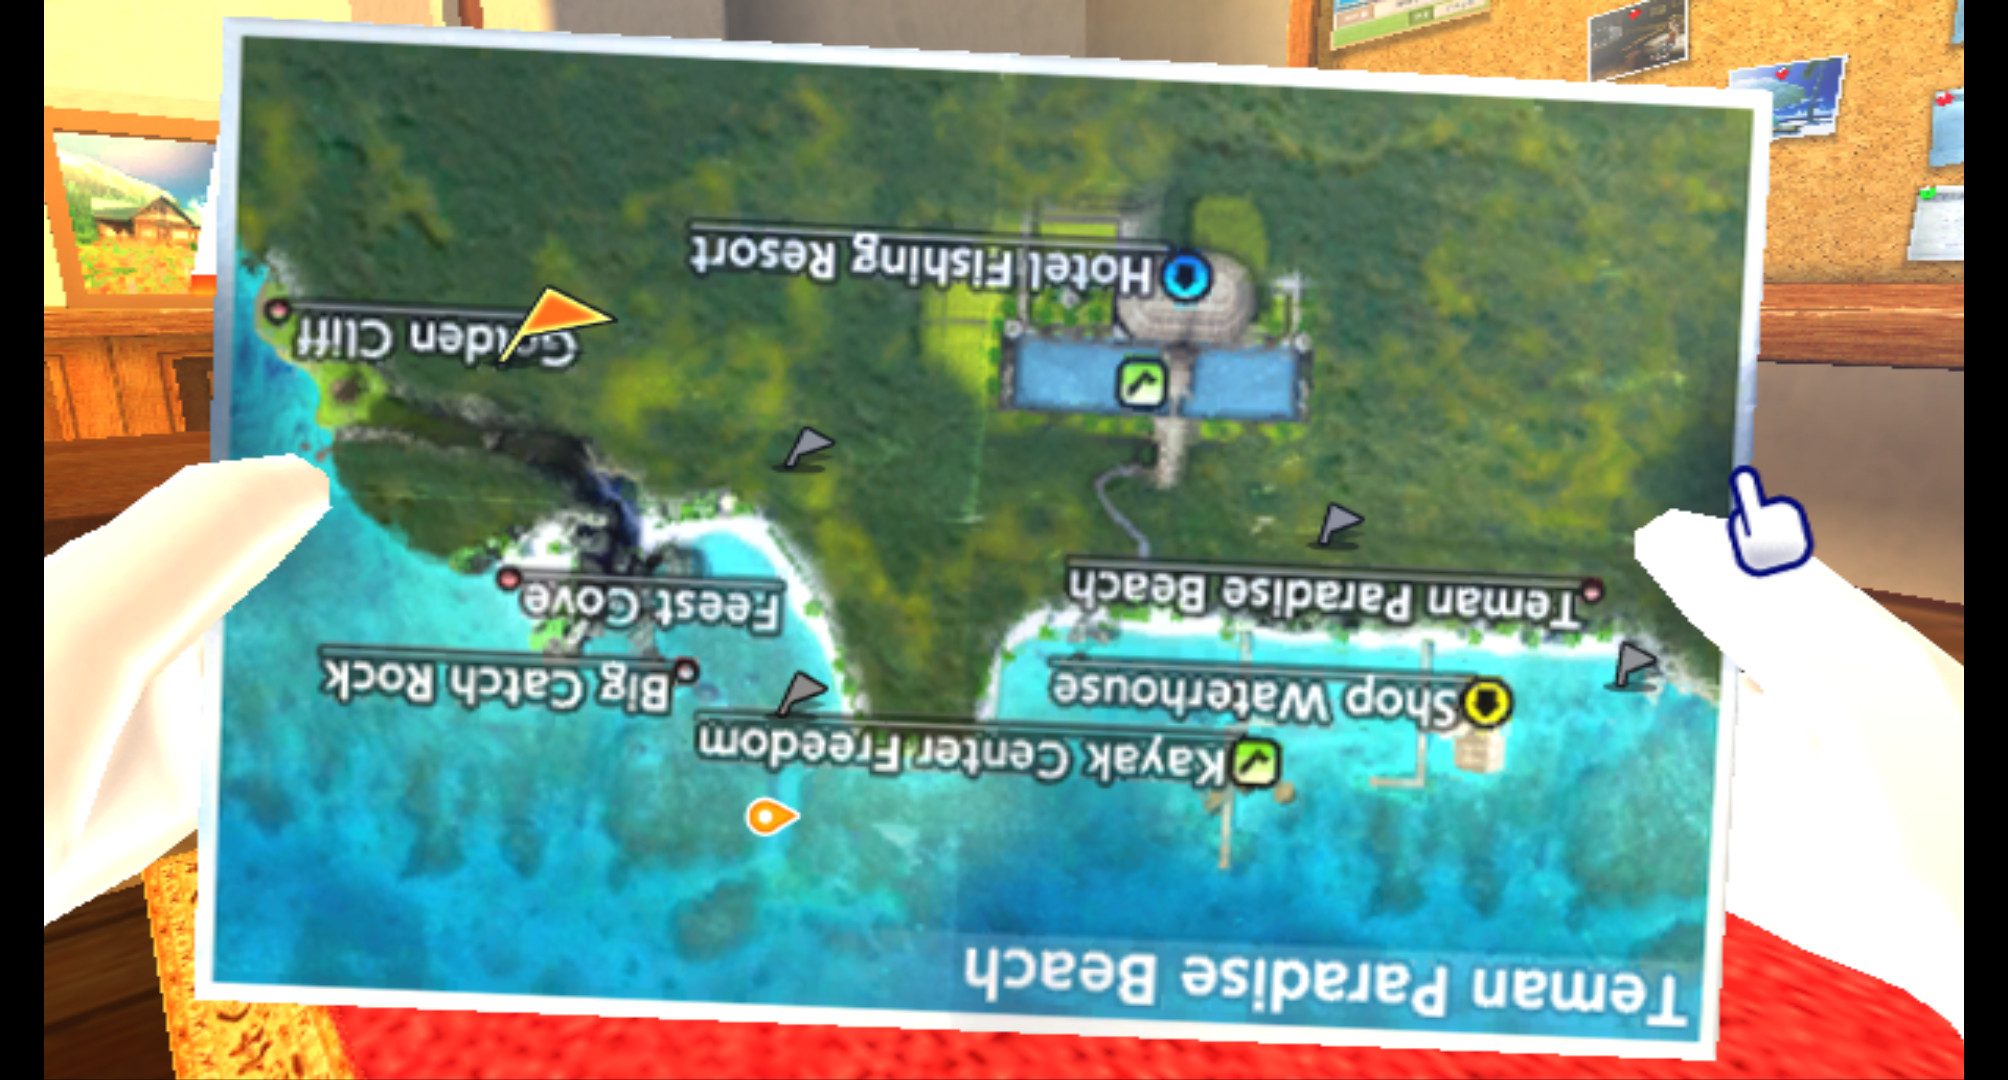 https://wiki.dolphin-emu.org/images/8/8a/Dolphin_Fishing_Resort_Wii_Upside_Down_Map.jpg